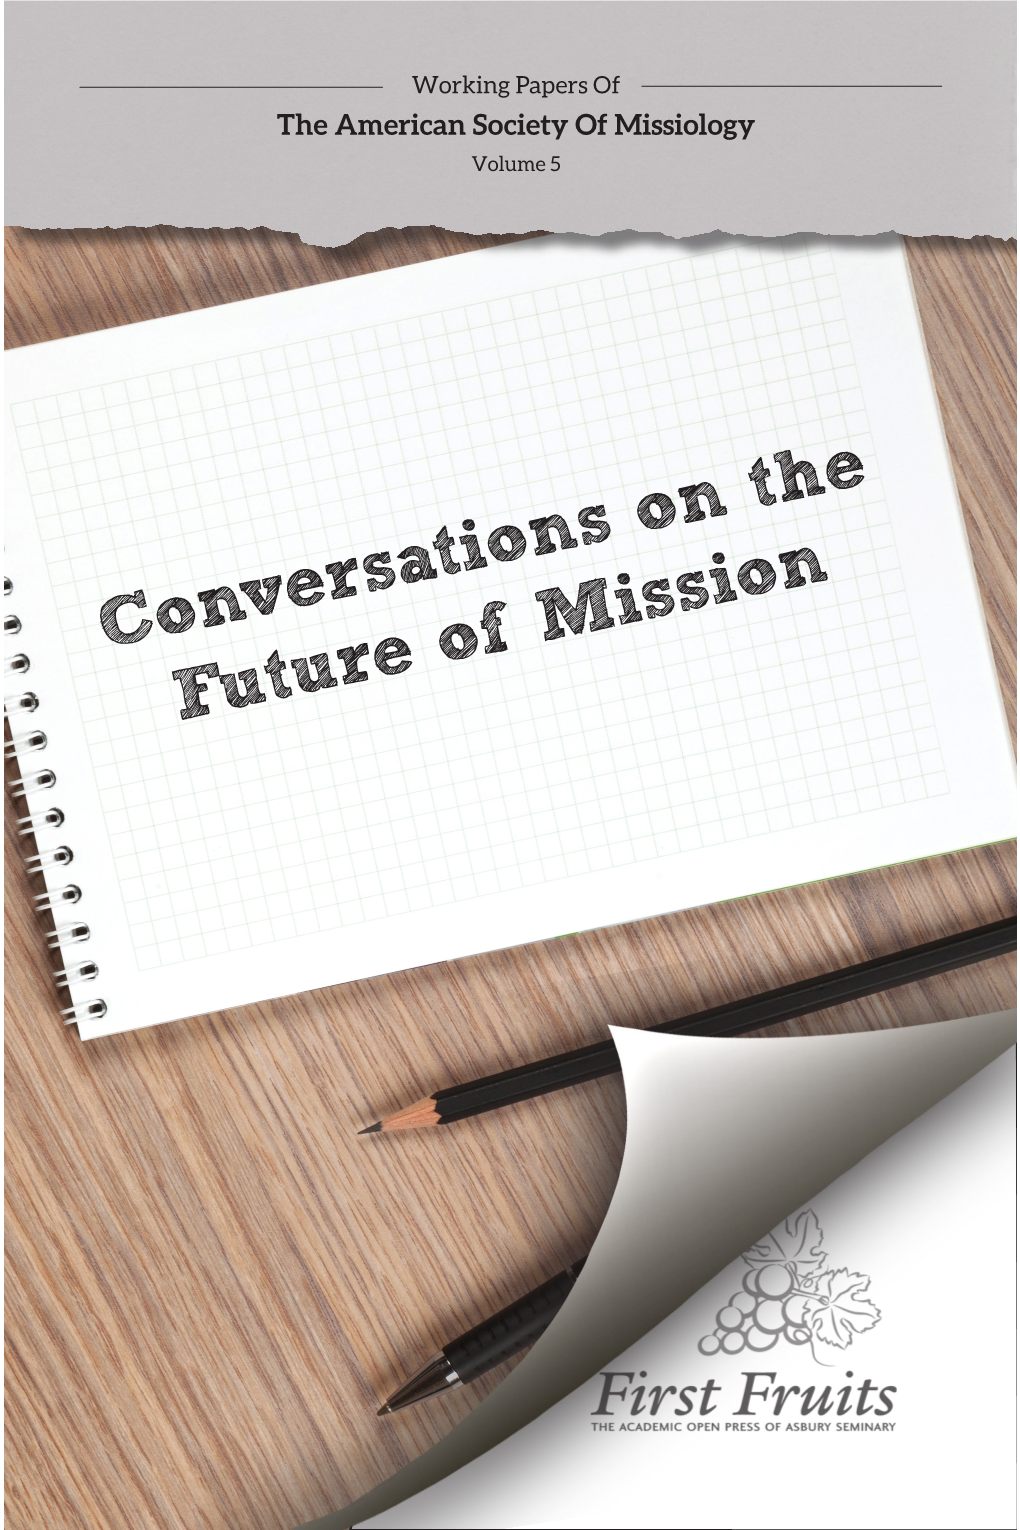 Vol. 5 Conversations on the Future of Mission